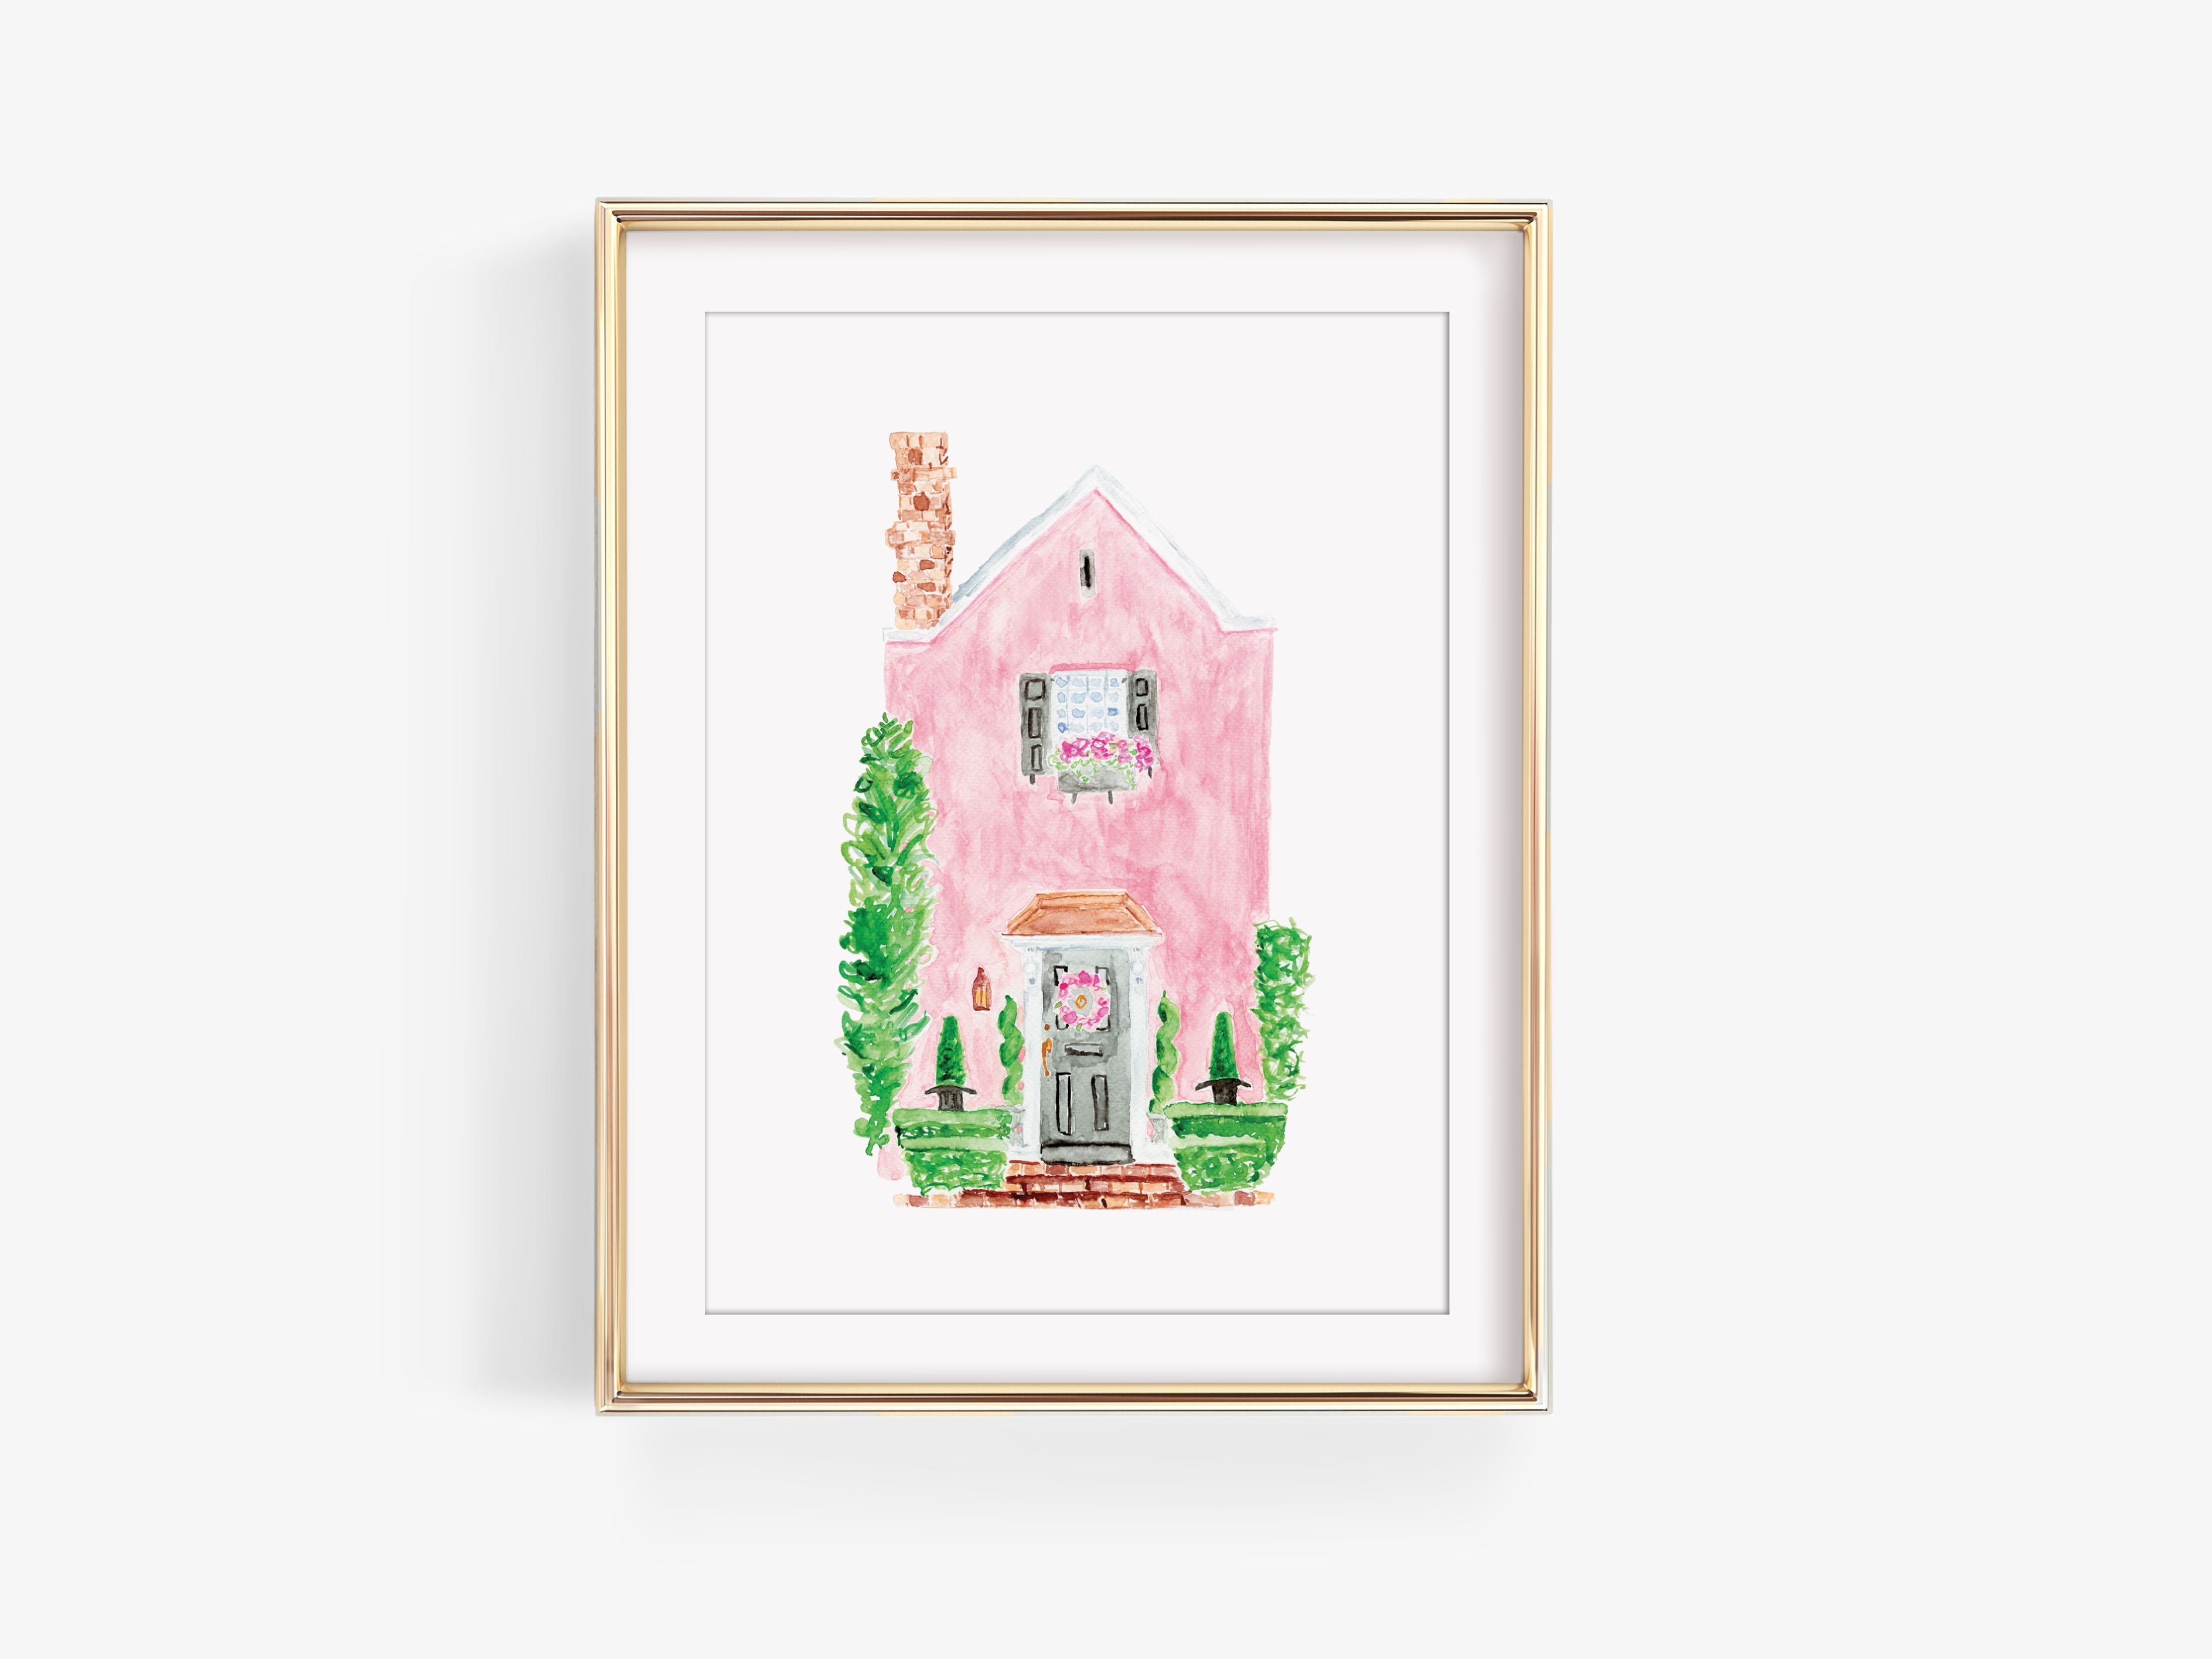 Pink Charleston SC House Art Print-This watercolor art print features our hand-painted pink Charleston, SC townhome, printed in the USA on 120lb high quality art paper. This makes a great gift or wall decor for the pastel house lover in your life.-The Singing Little Bird